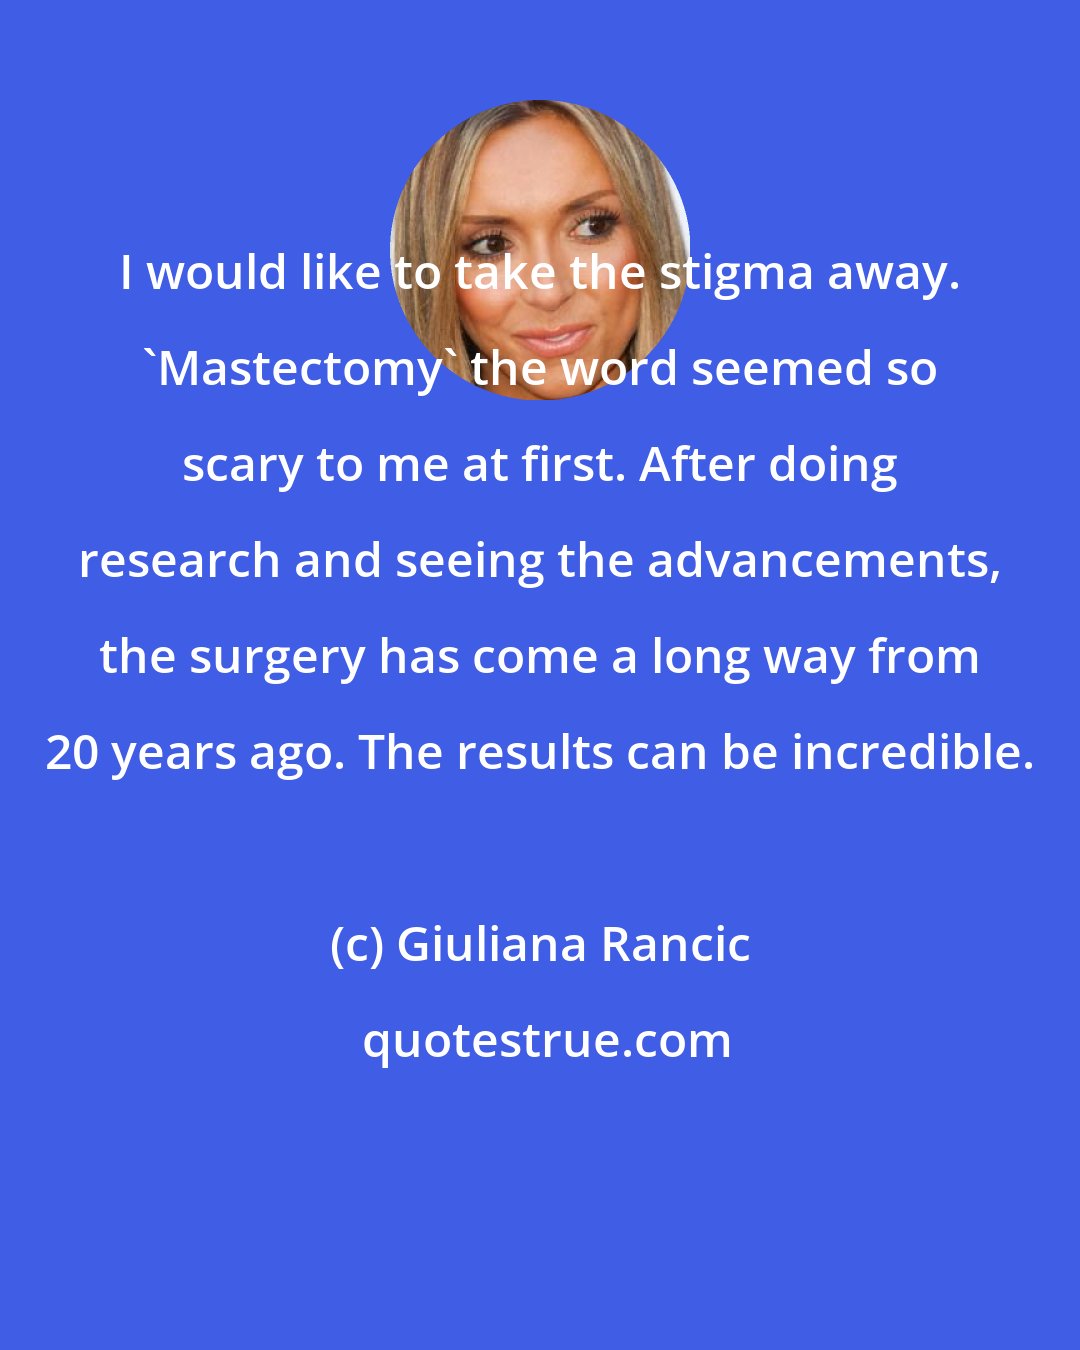 Giuliana Rancic: I would like to take the stigma away. 'Mastectomy' the word seemed so scary to me at first. After doing research and seeing the advancements, the surgery has come a long way from 20 years ago. The results can be incredible.